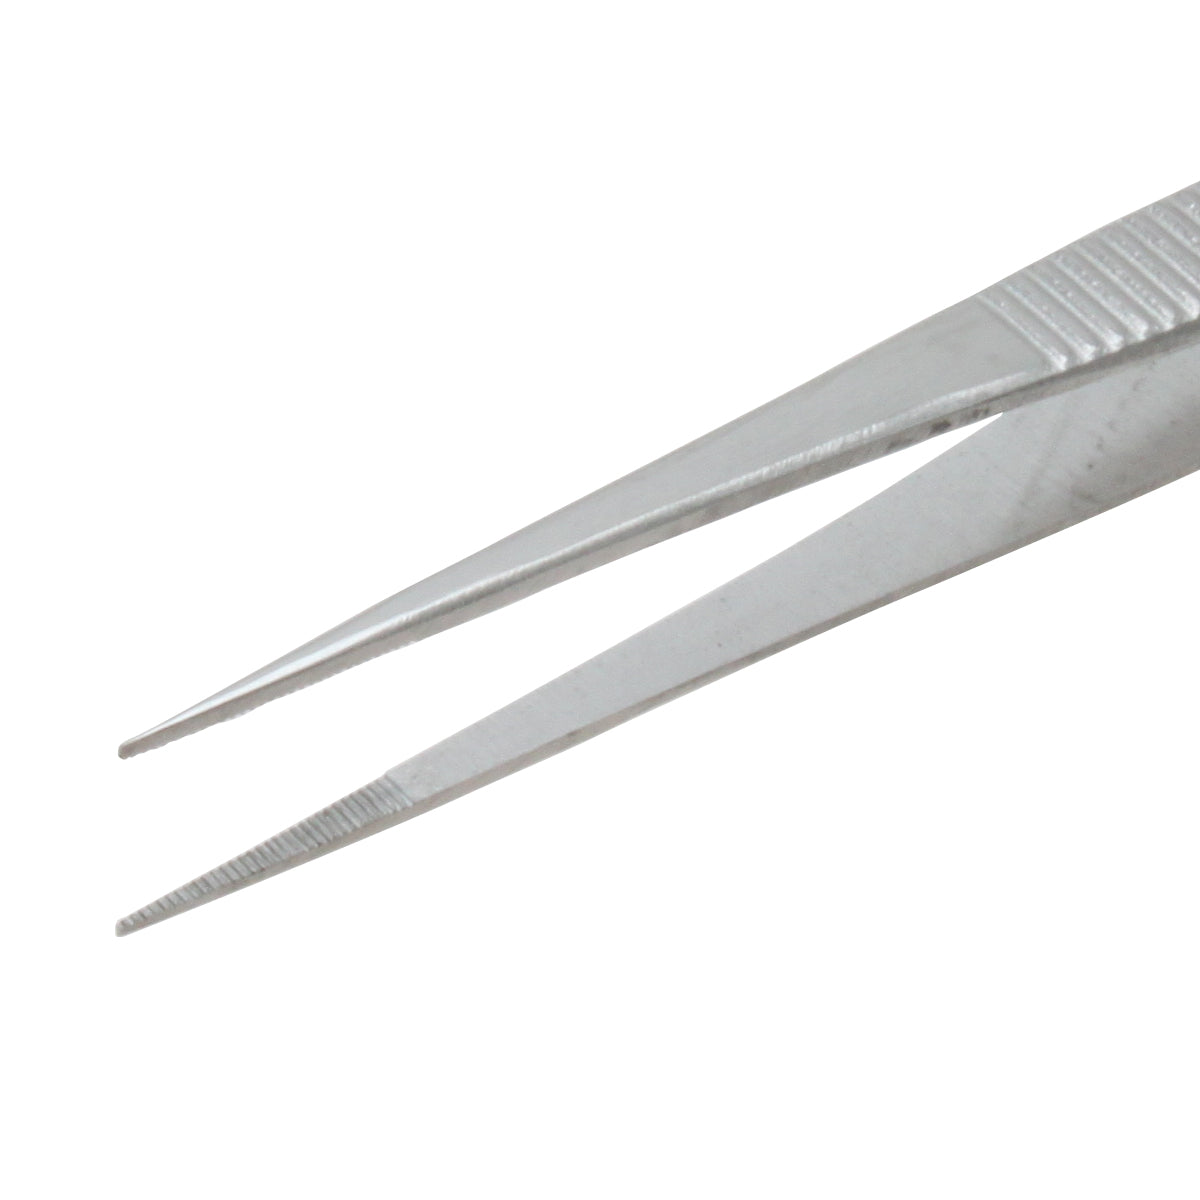 Splinter Forceps Straight Serrated Tip 4-1/2 inches